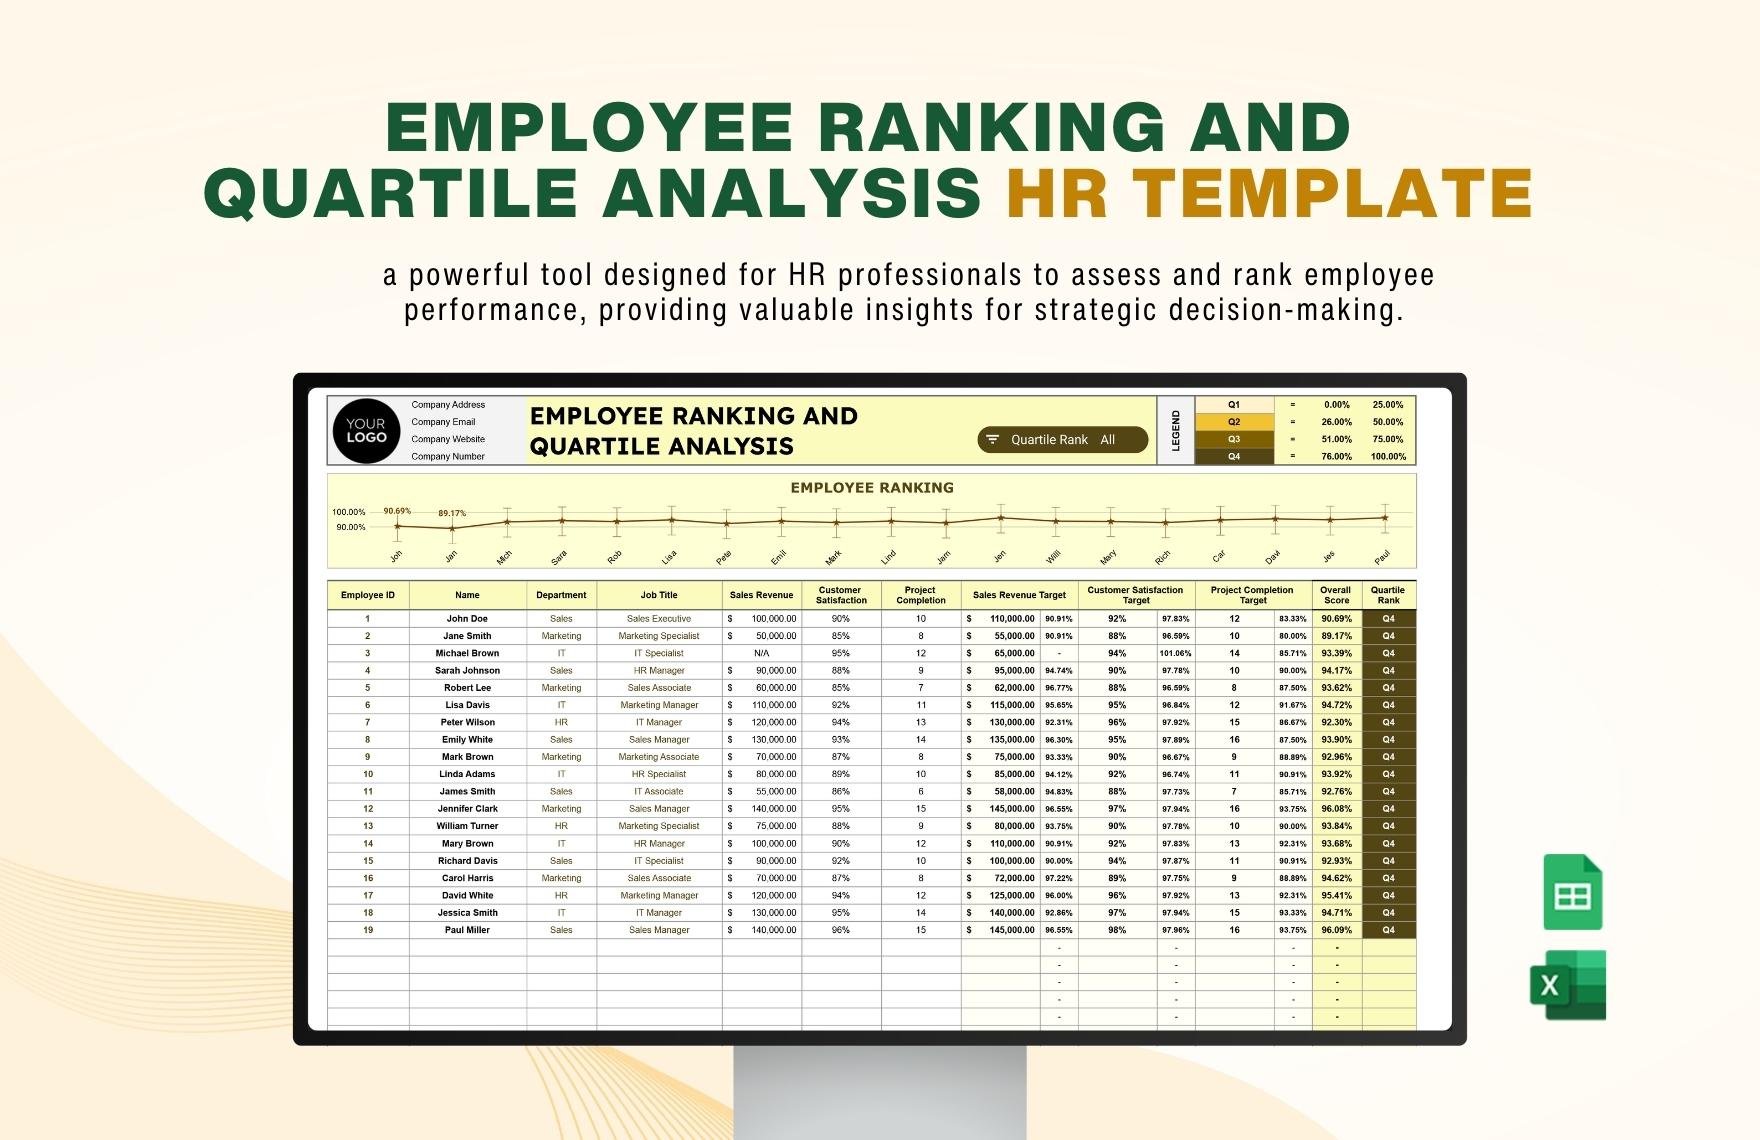 Employee Ranking and Quartile Analysis HR Template